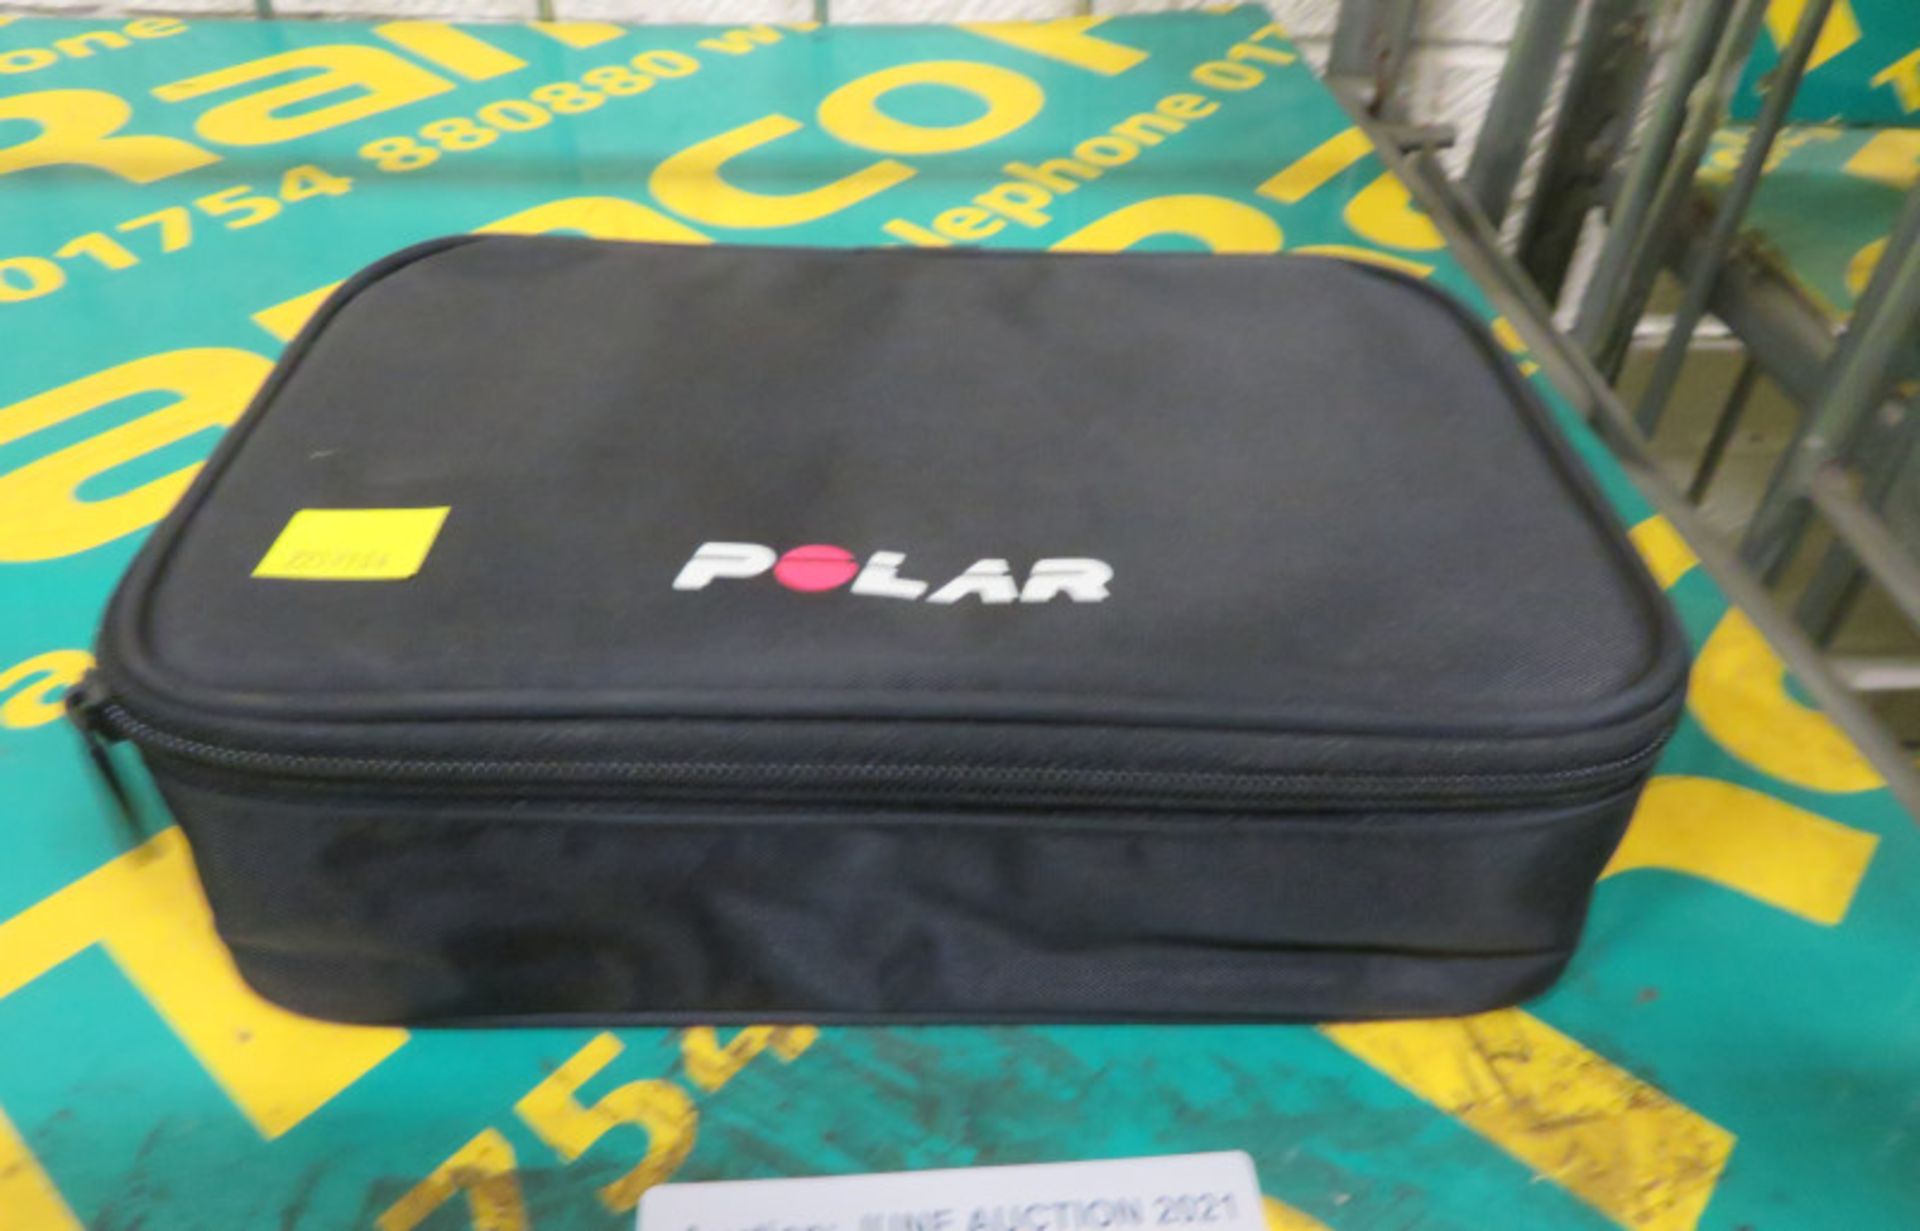 Polar S410/S210 Wrist Heart Rate Monitor with case - Image 3 of 3